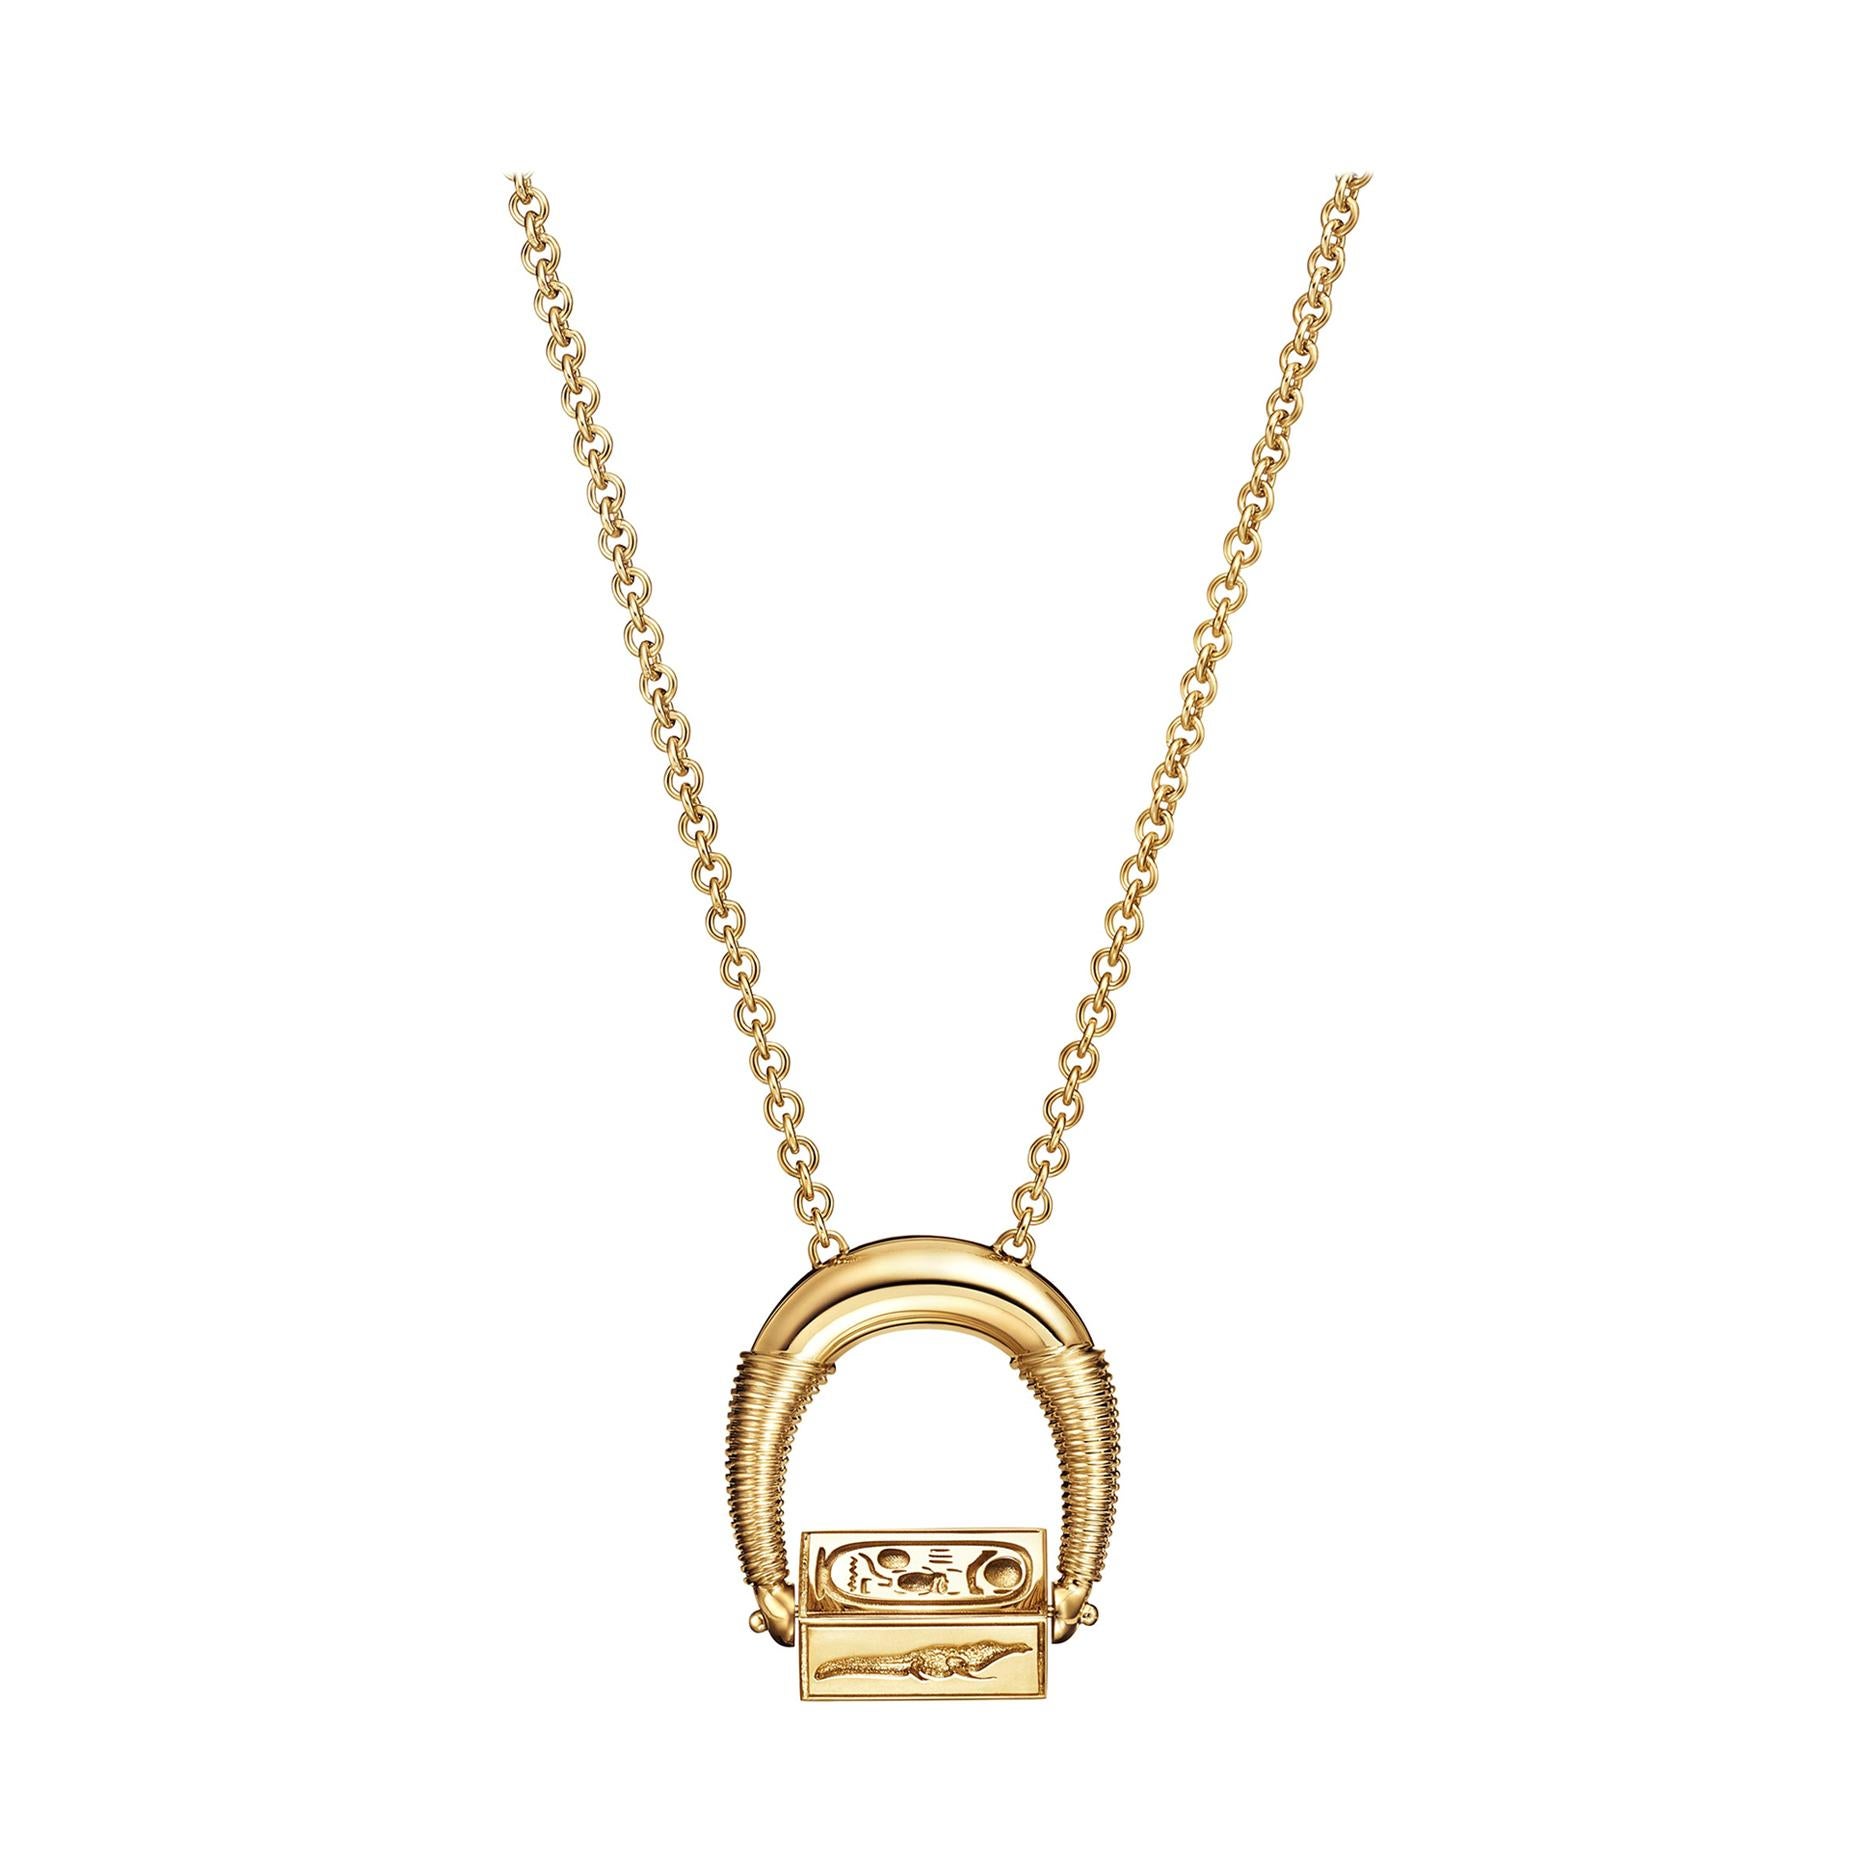 18kt Fairmined Ecological Yellow Gold Engraved Egyptian Odyssey Pendant Necklace